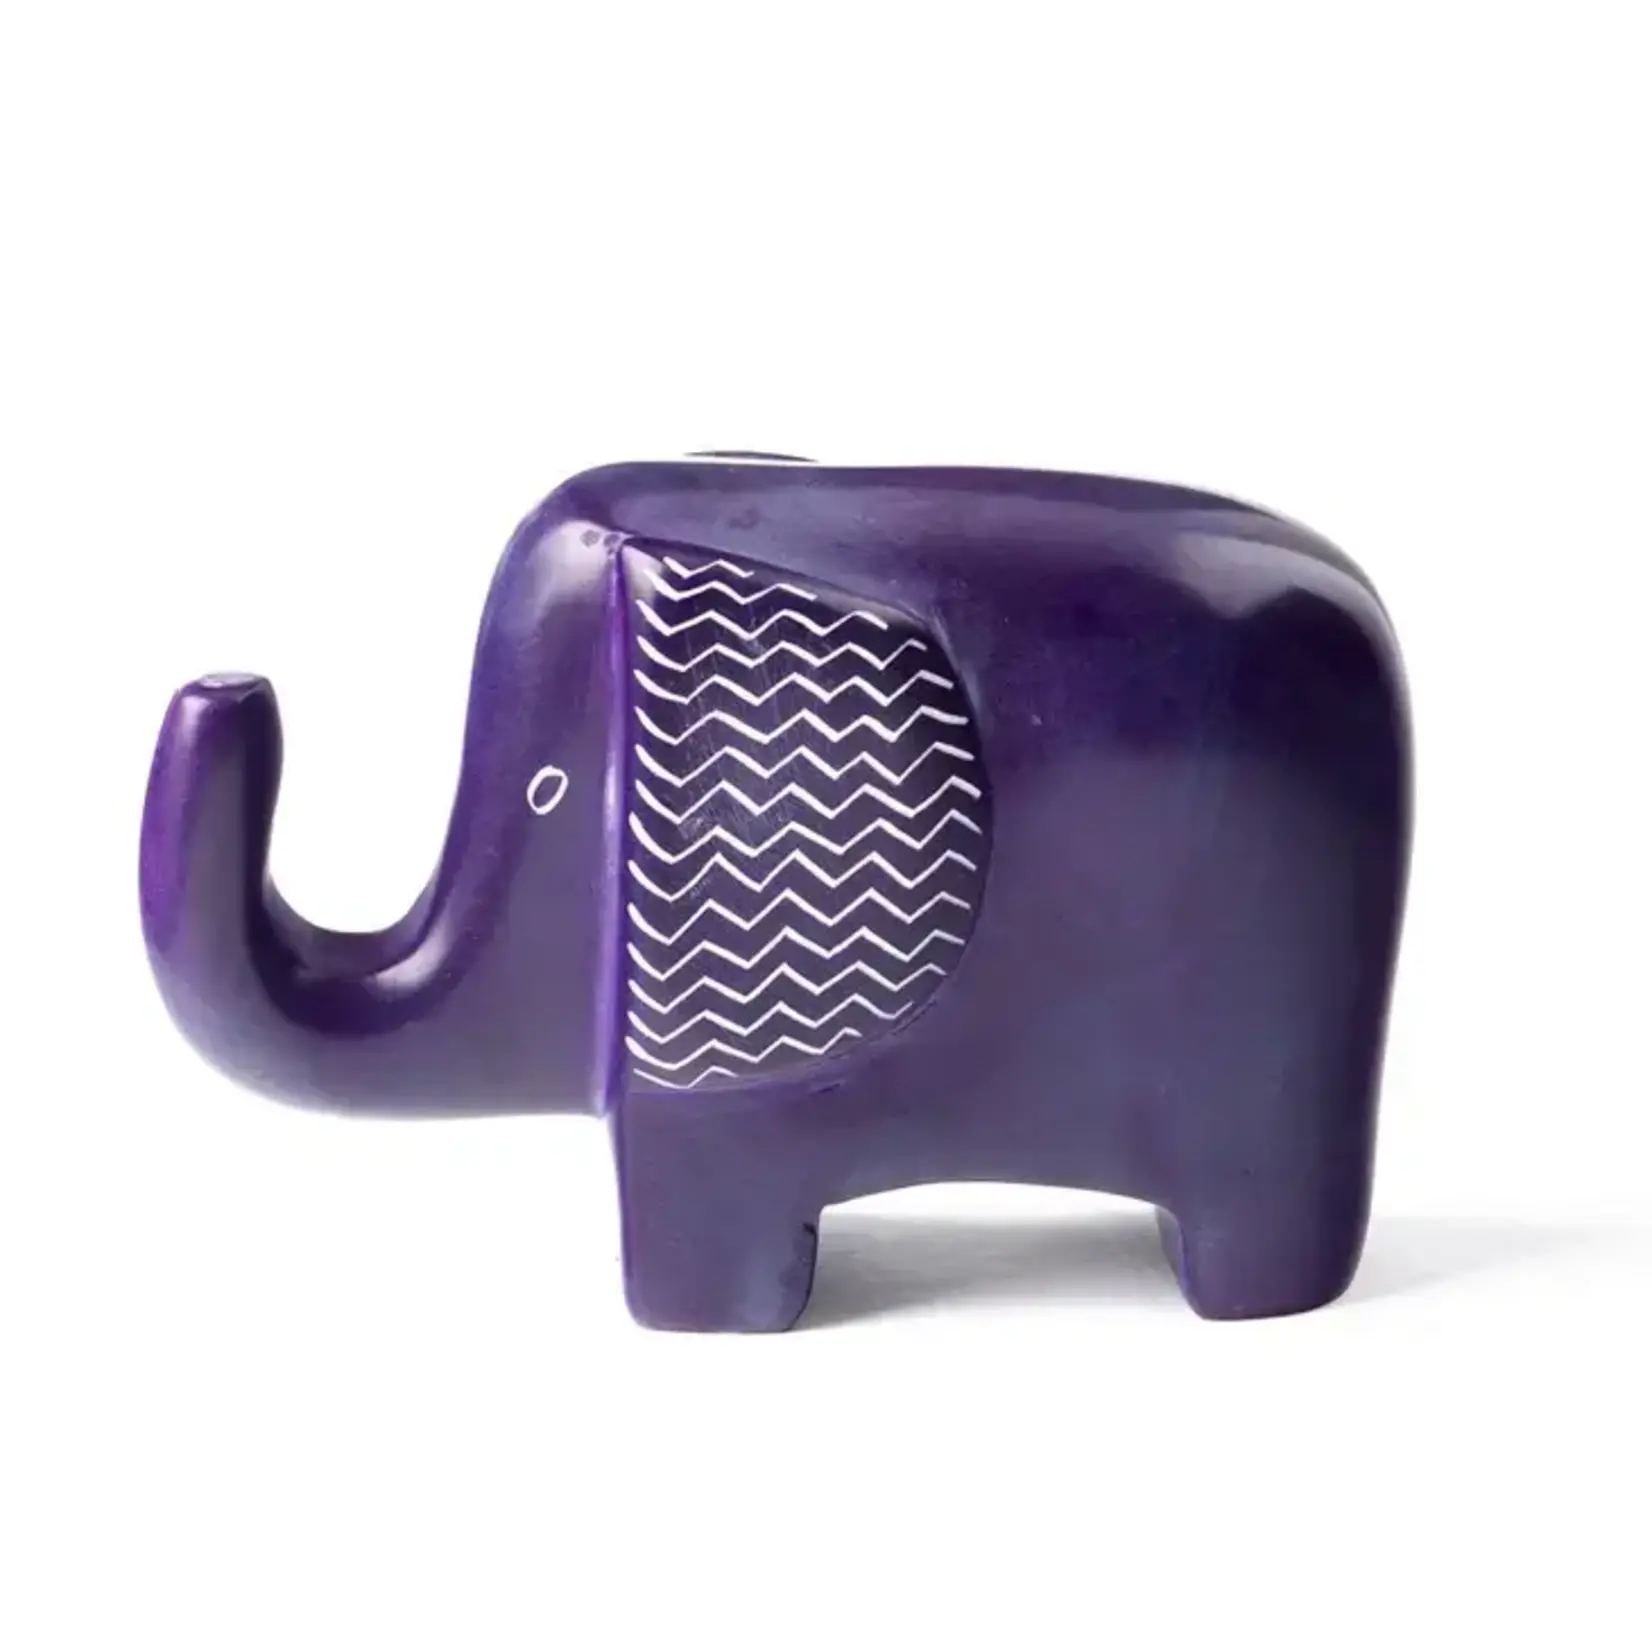 Small StoneKenyan artisans hand carve sweet elephant sculptures from soft soapstone, then hand dye each piece with pretty purple dye. Incised zigzag designs on the ears add personality. Elephant